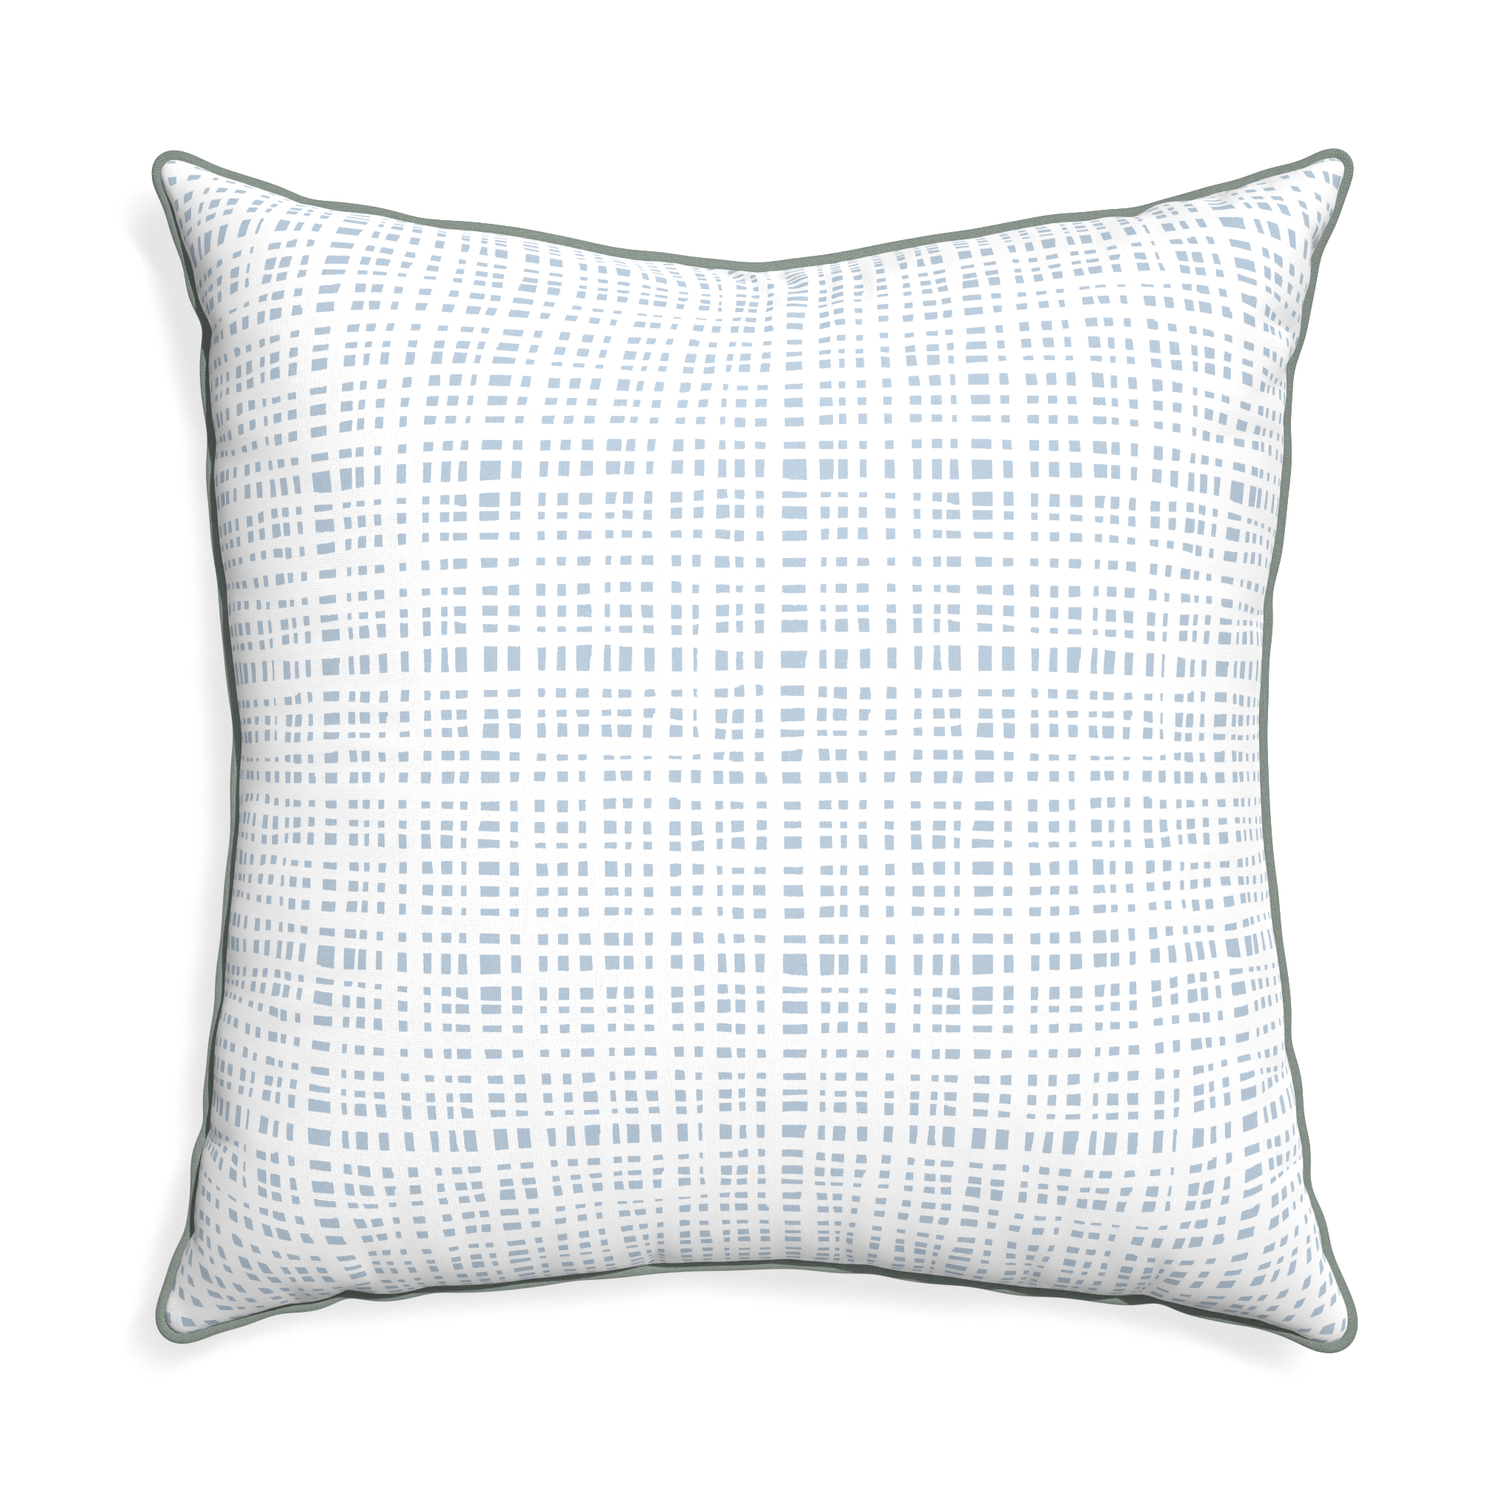 Euro-sham ginger custom plaid sky bluepillow with sage piping on white background